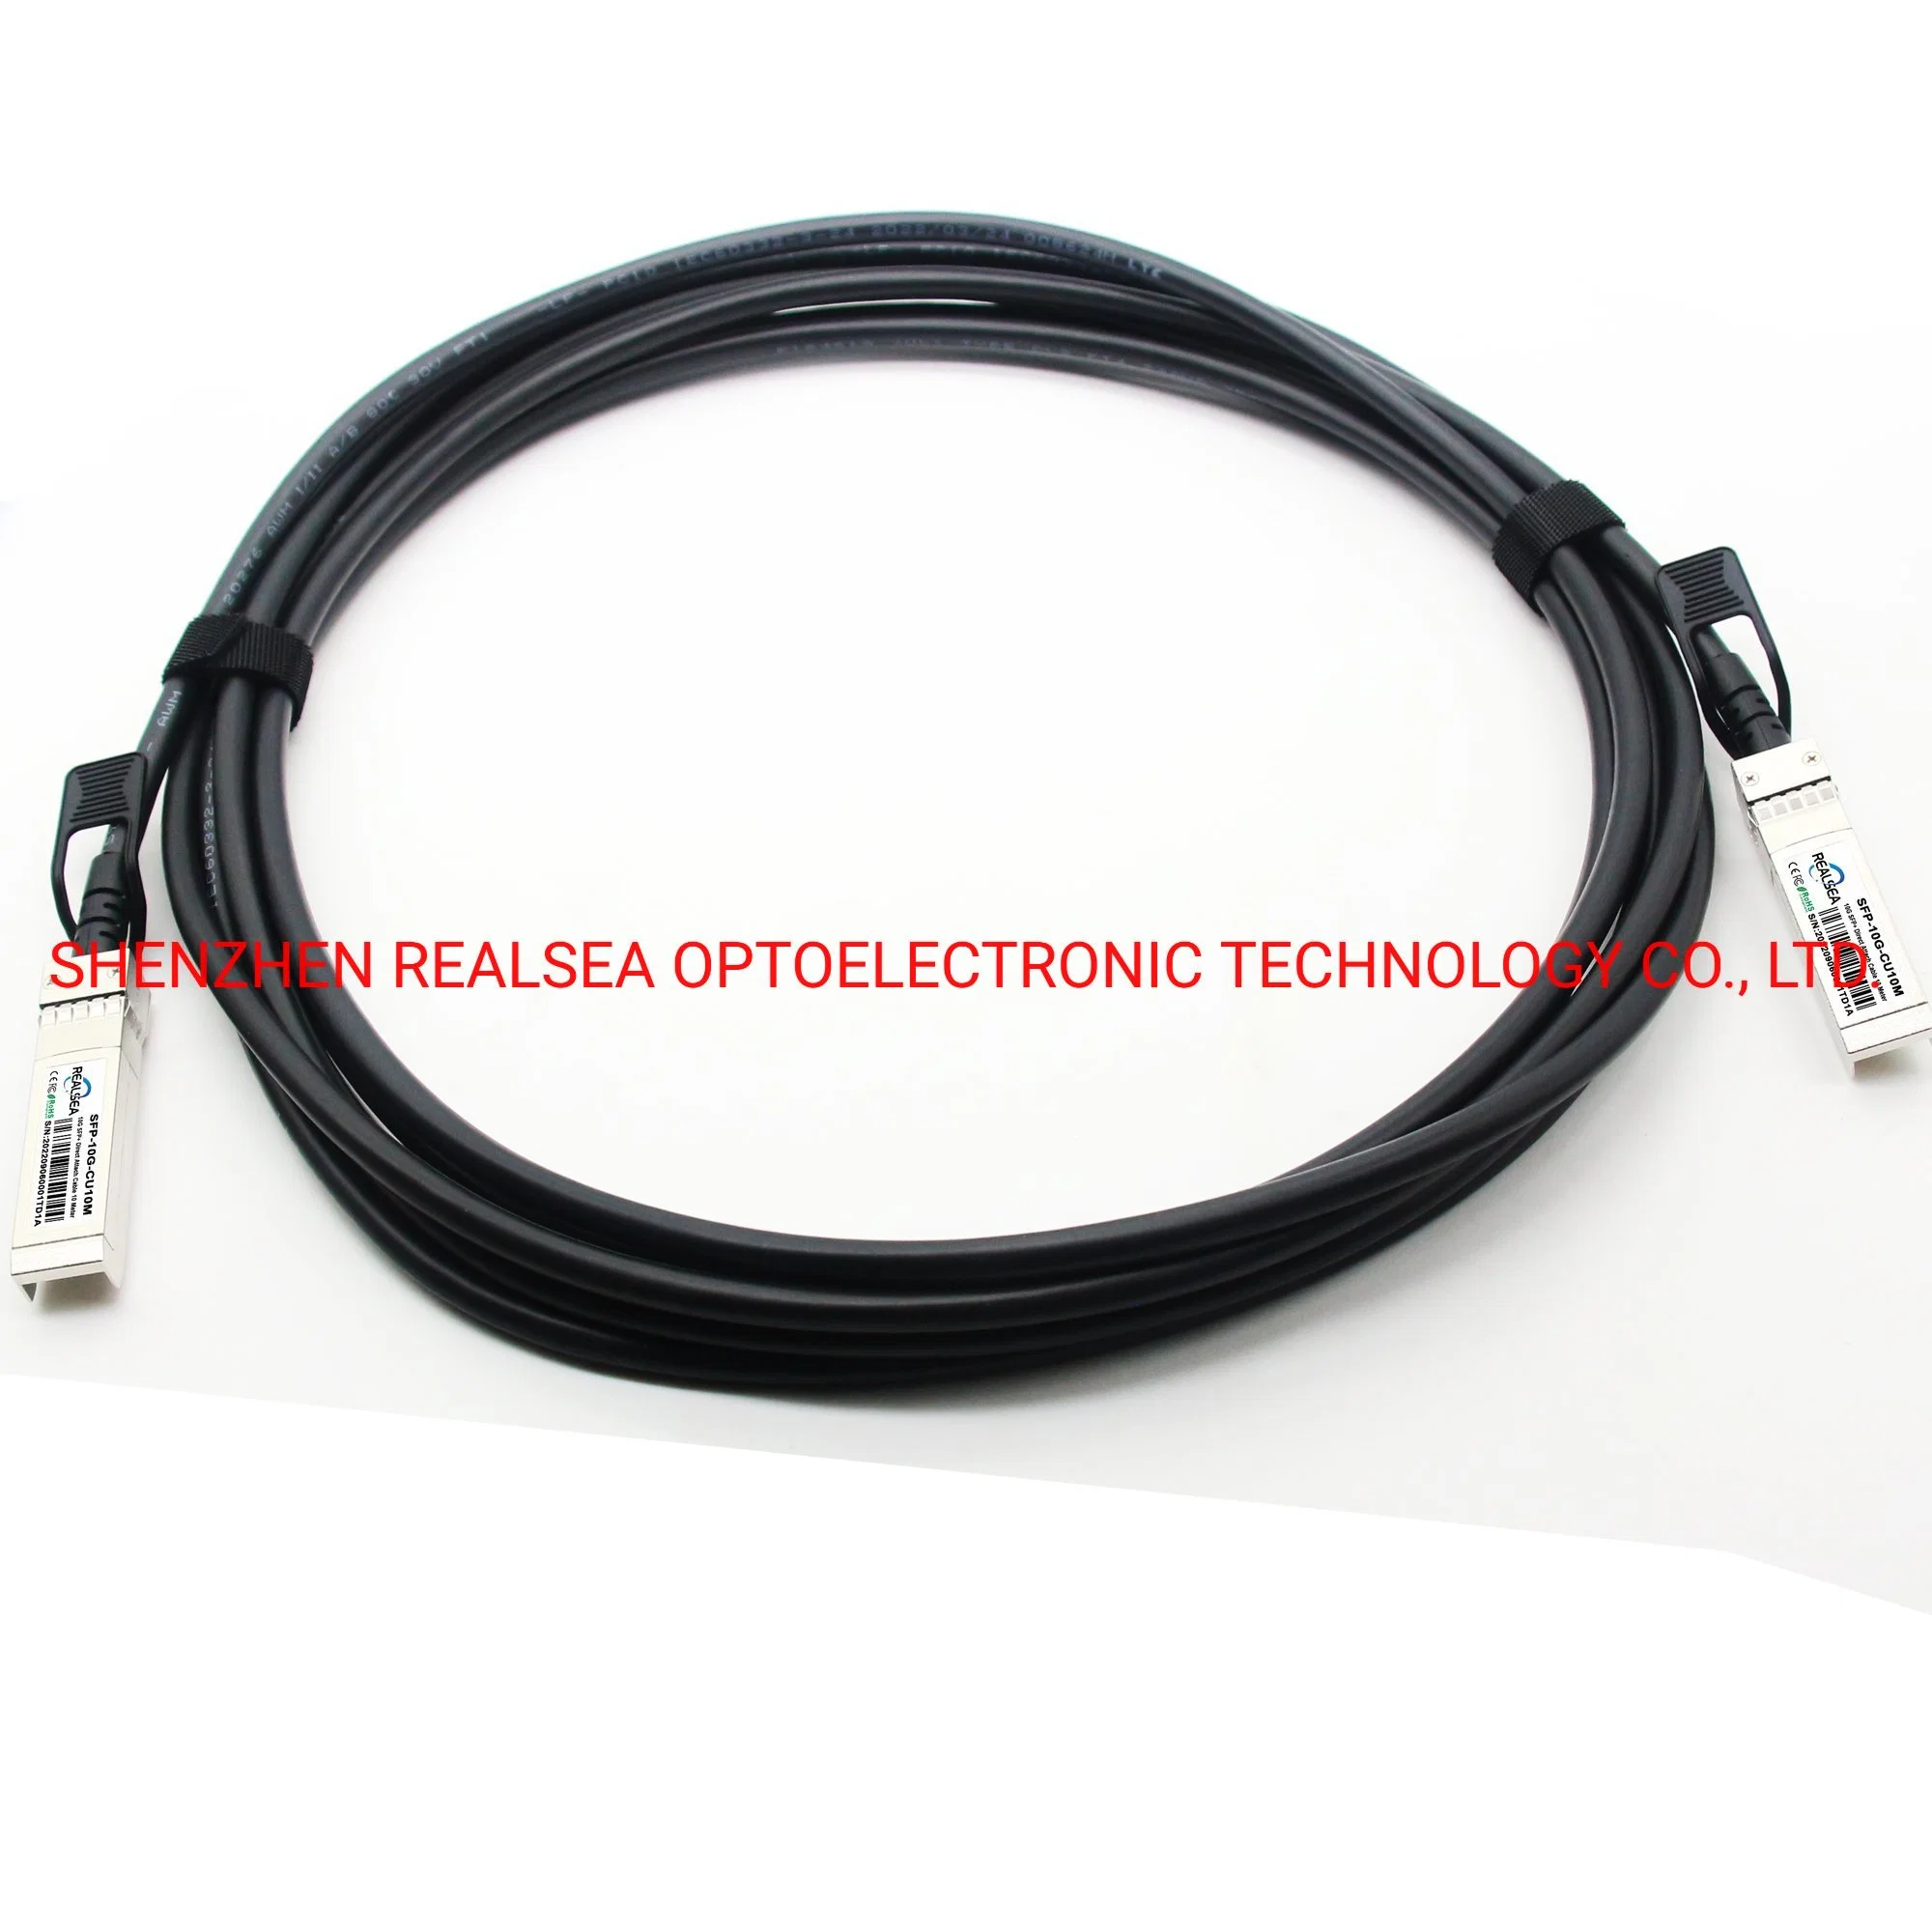 10meter 10g Dac Cable Compatible SFP-10g-Cu10m 10g Copper Twinax Direct Attach Cable with Length 10 Meter Dac